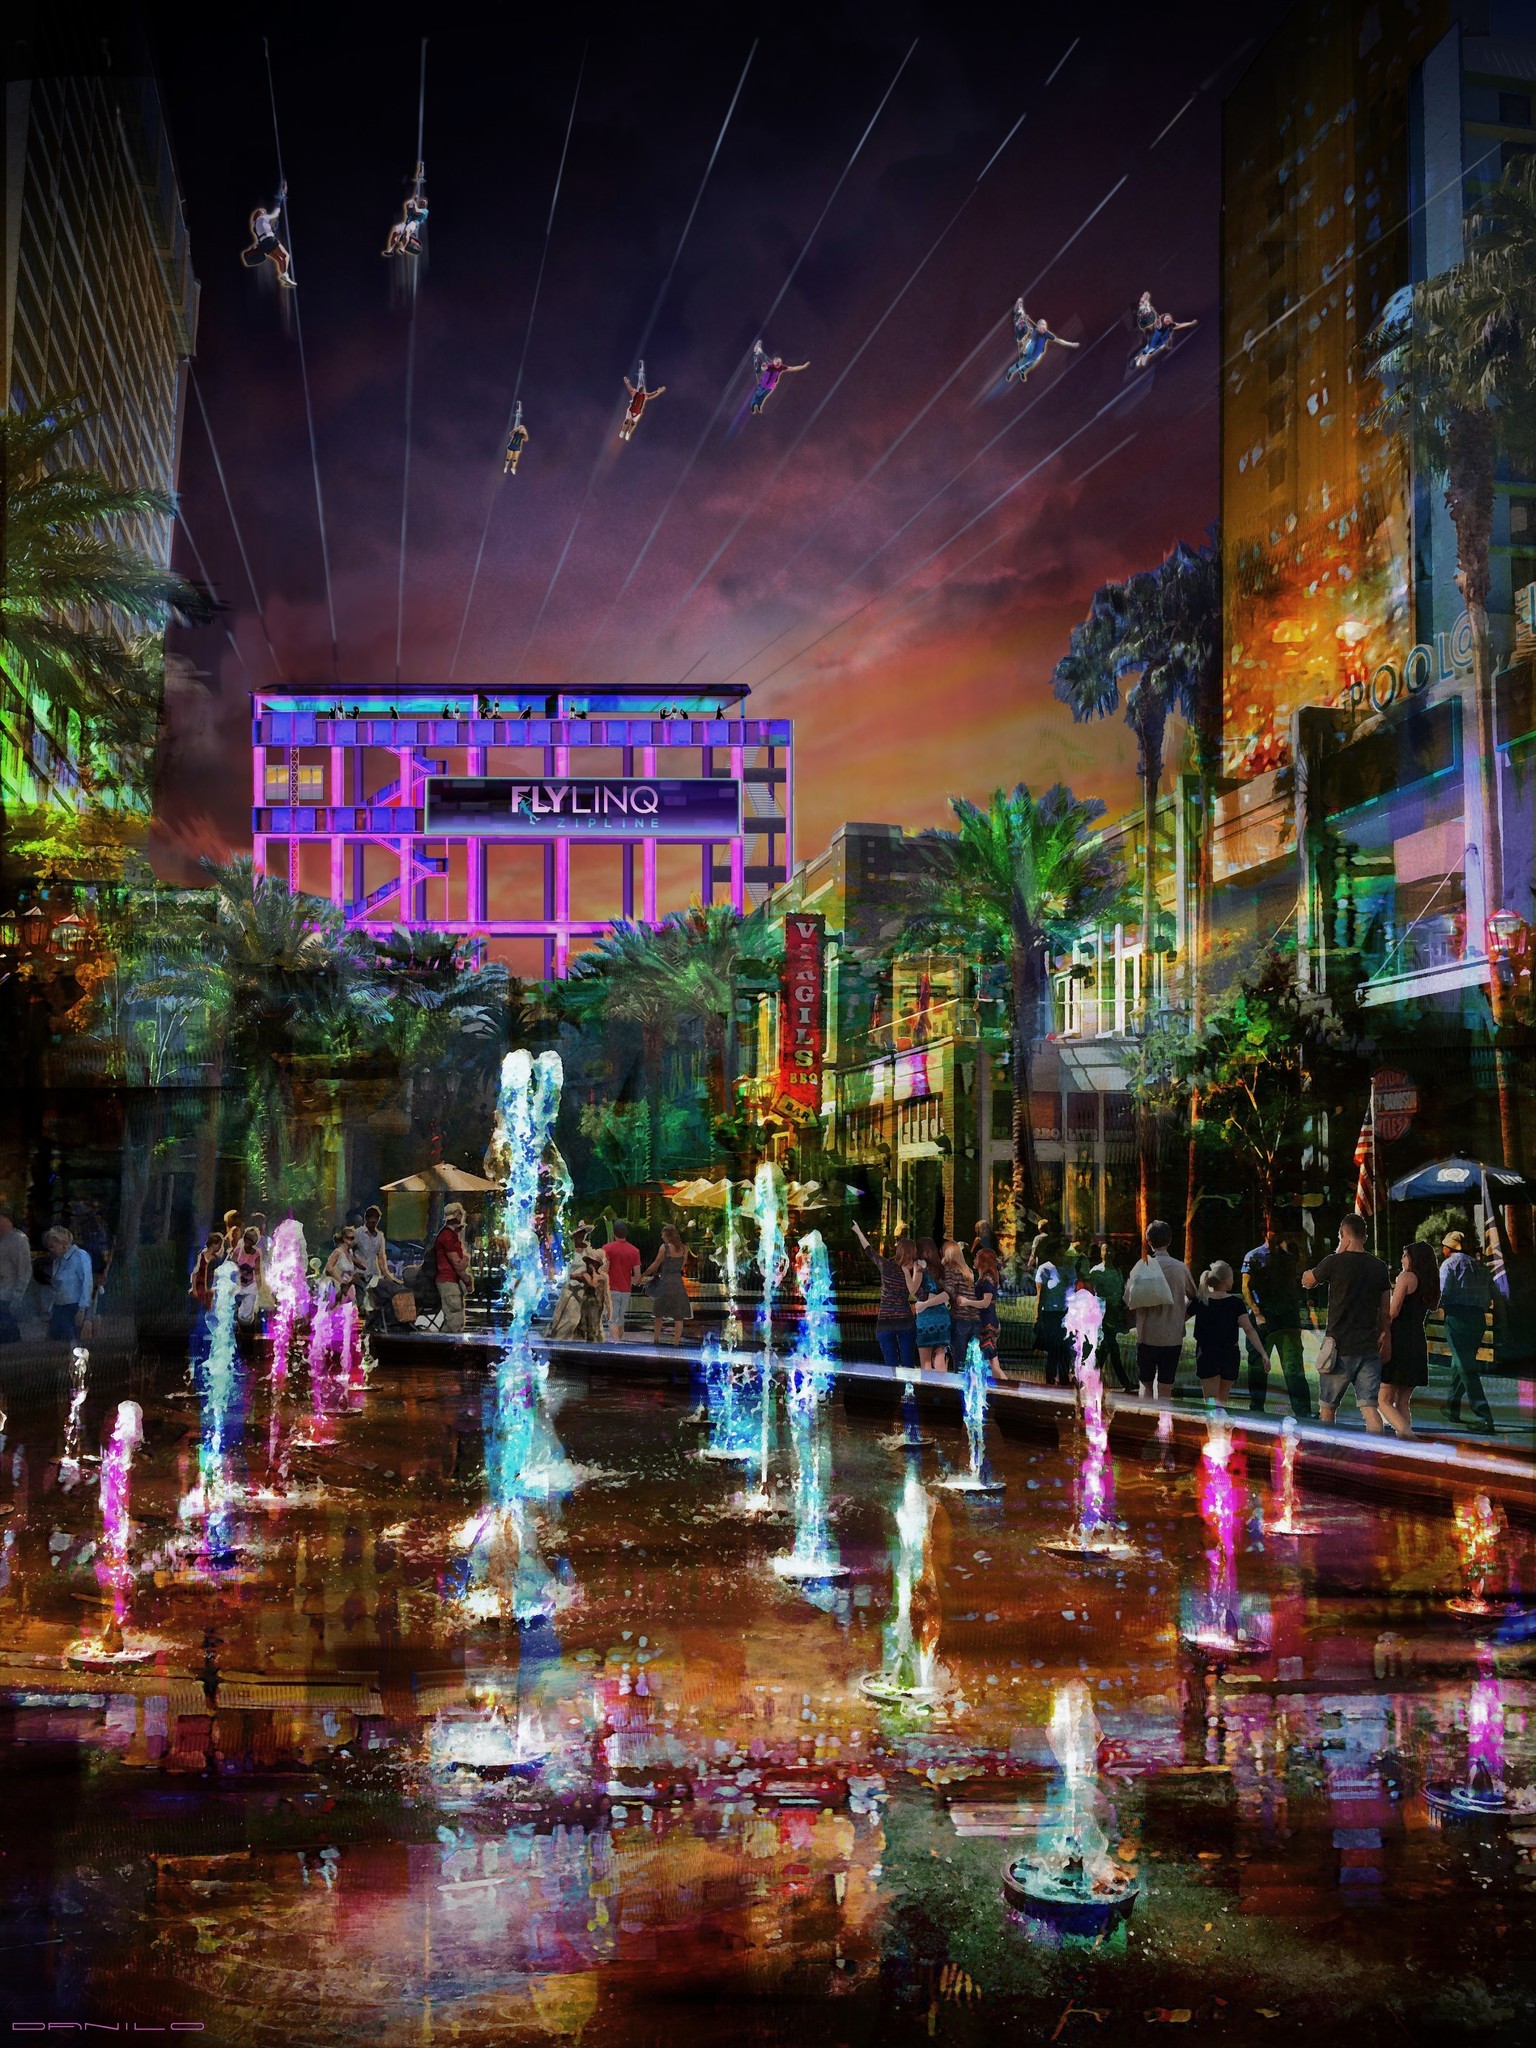 Fly Linq, the third zip-line in Las Vegas, is expected to open late in 2018. It's seen here in an artist's rendering.